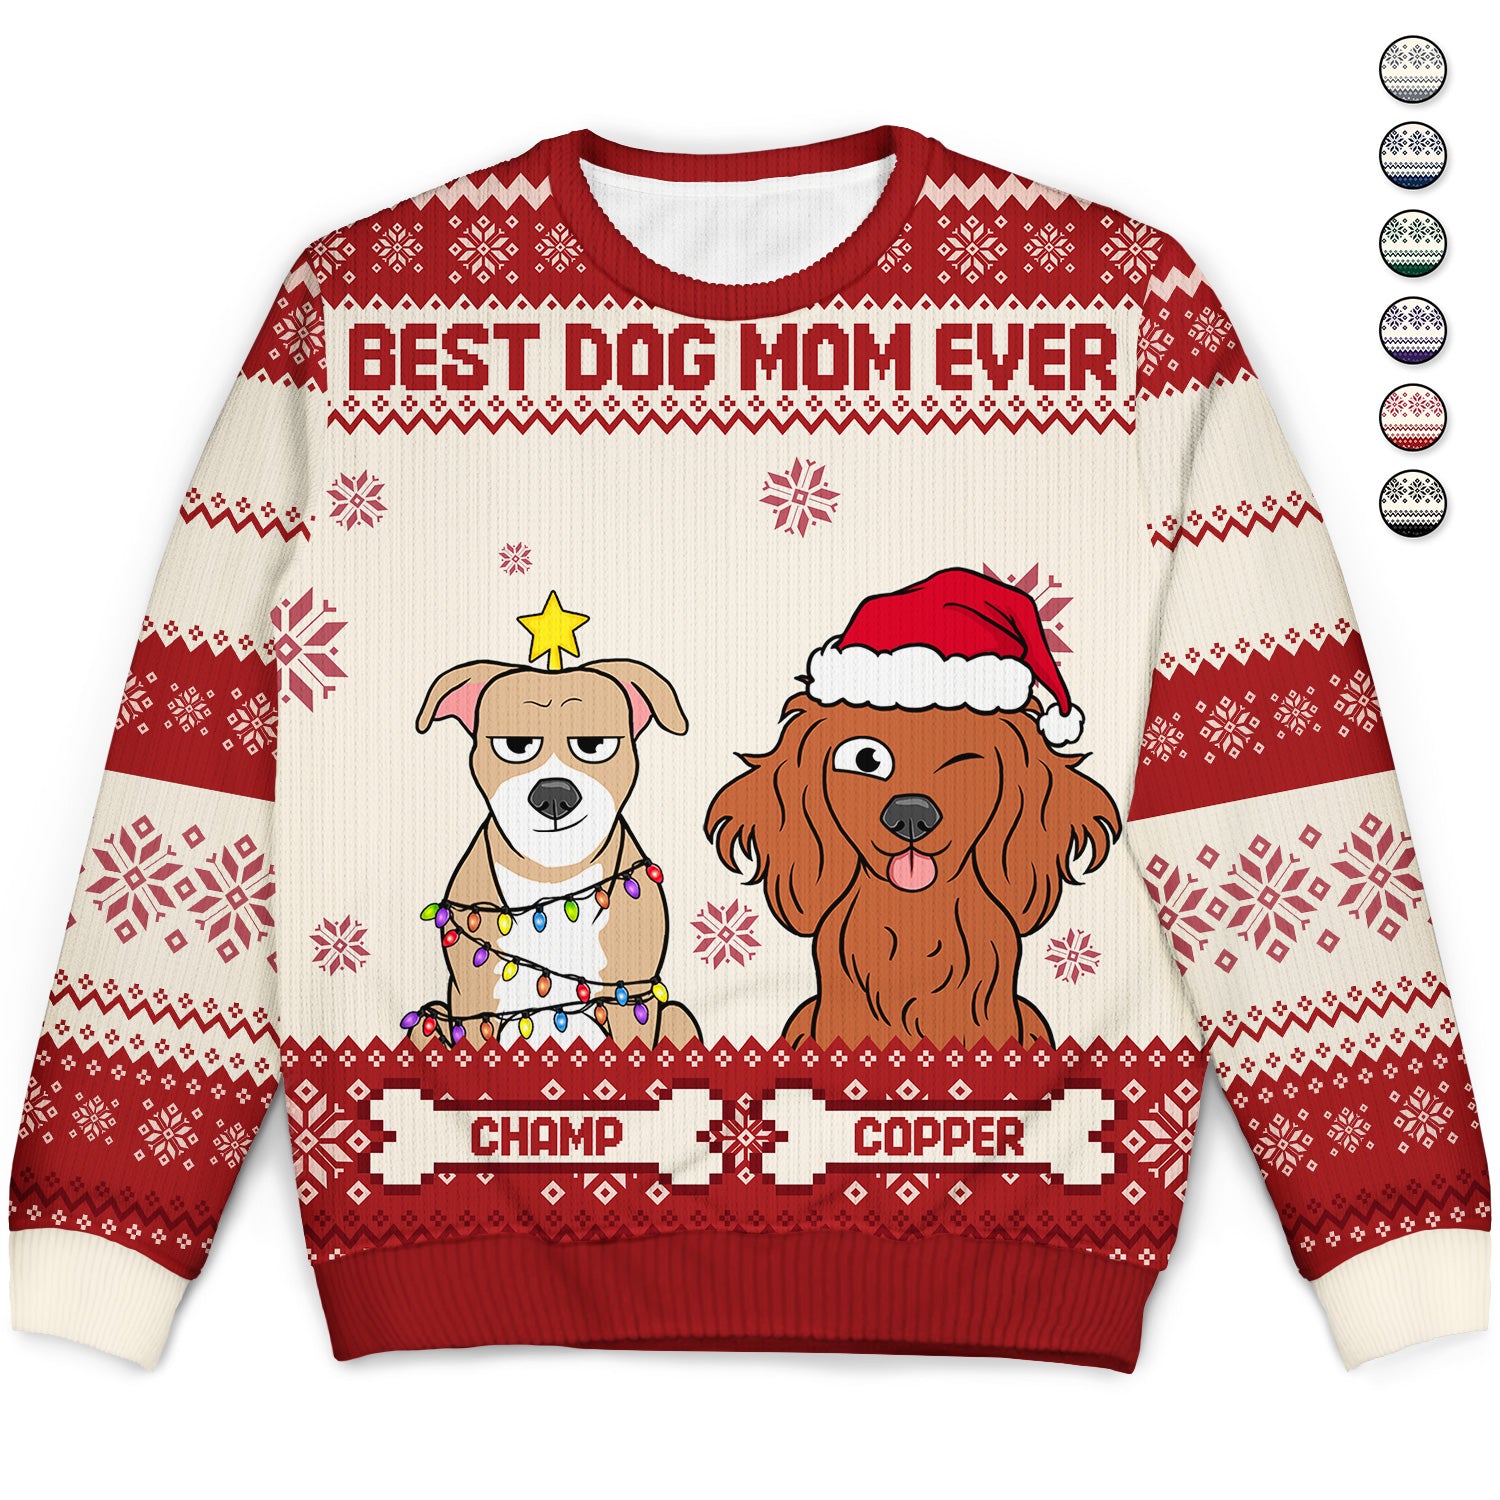 Best Dog Mom Ever - Christmas Gift, Gift For Dog Lovers, Dog Mom, Dog Dad, Pet Lovers - Personalized Unisex Ugly Sweater